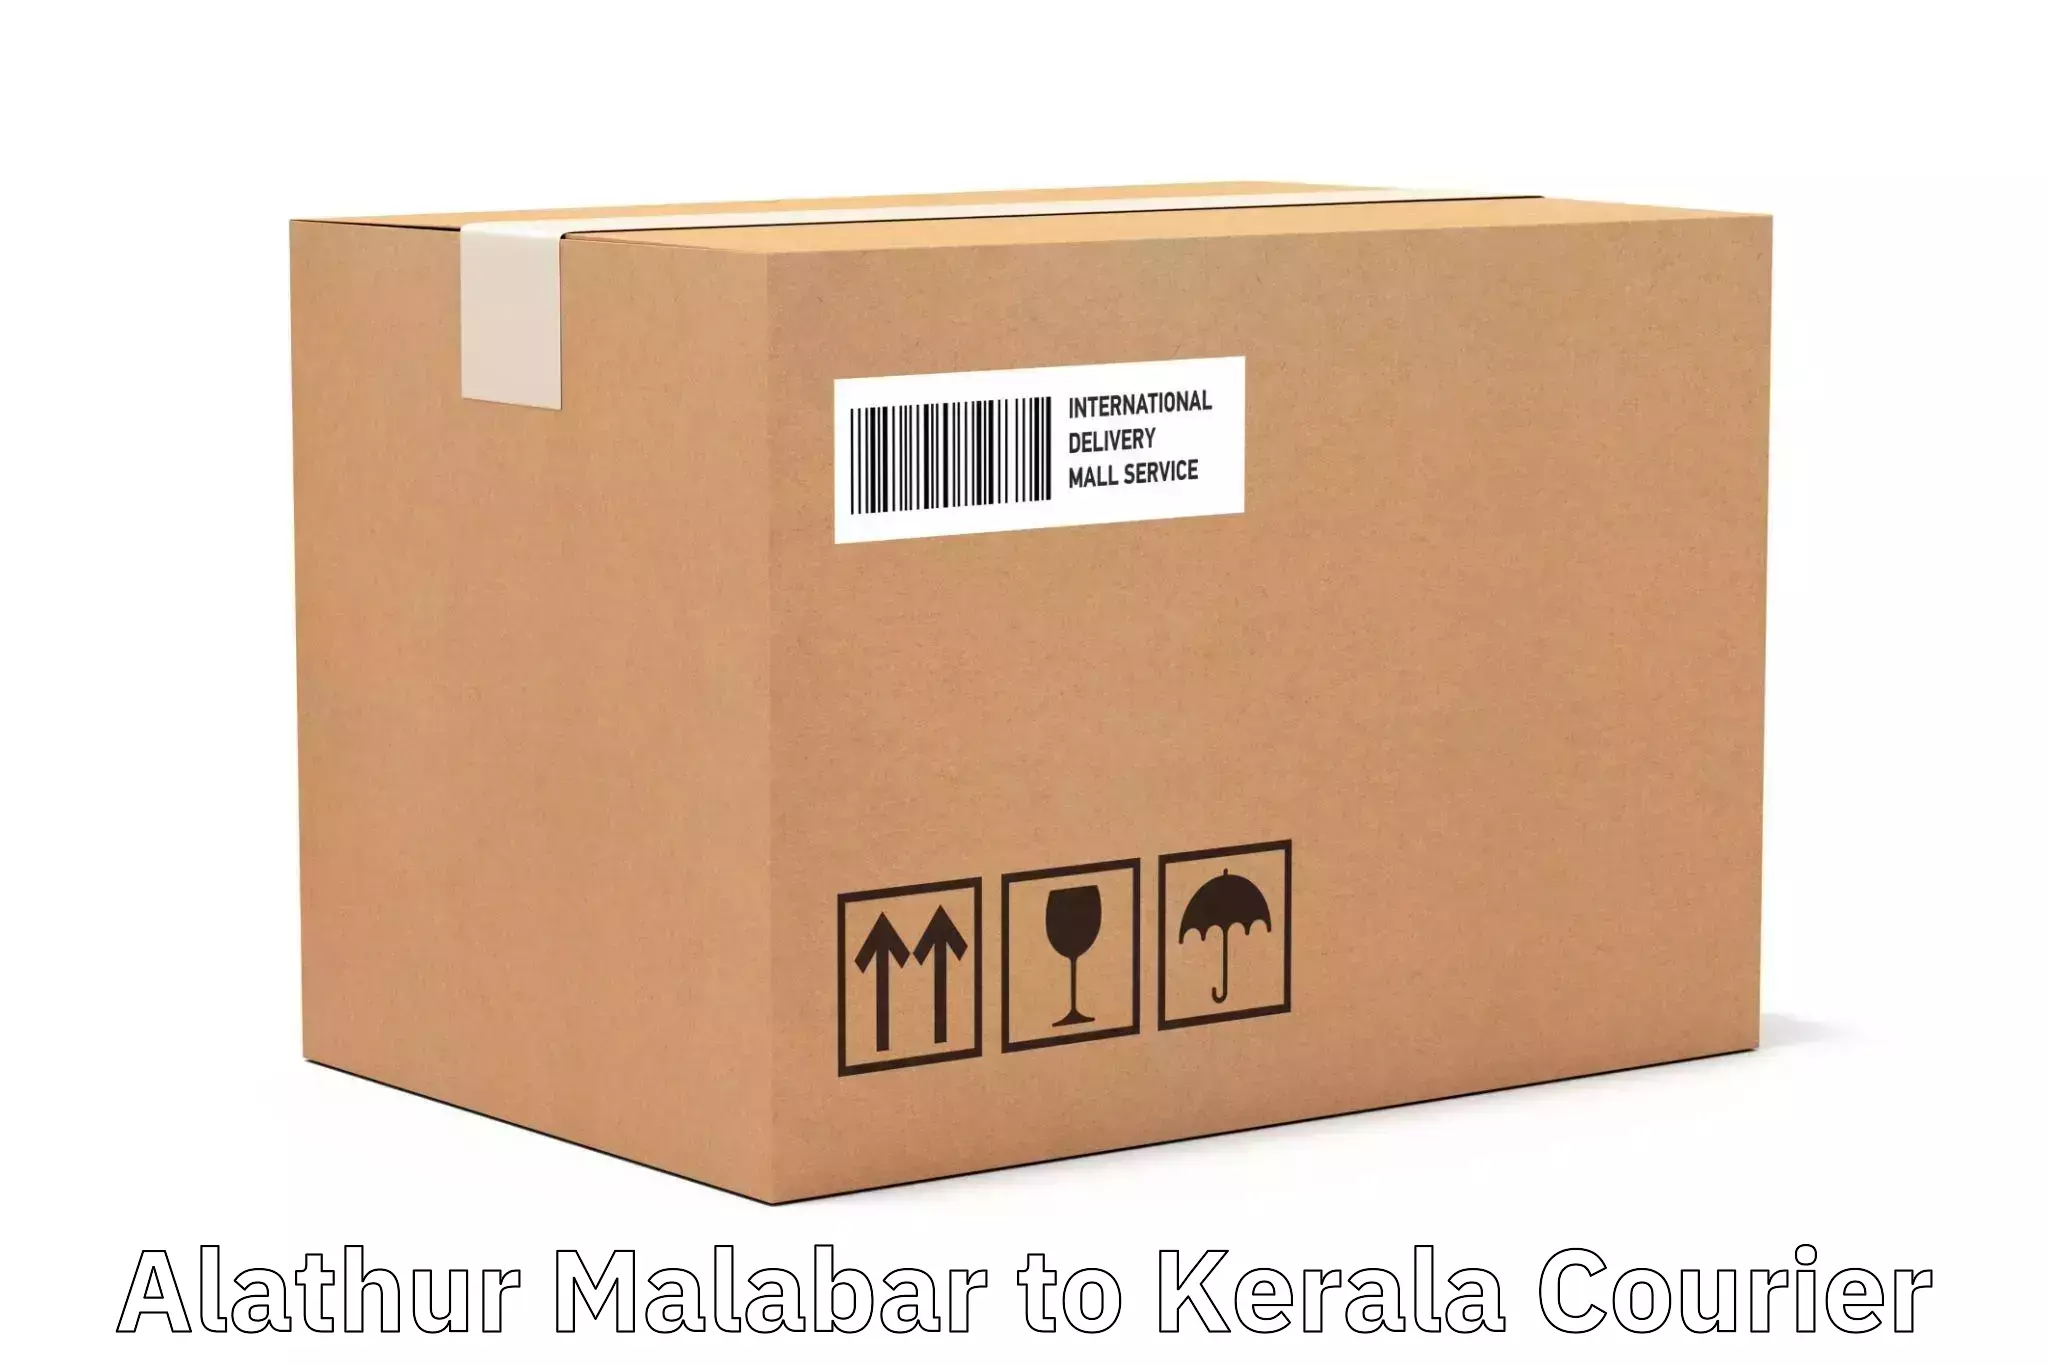 Package delivery network Alathur Malabar to Nallepilly